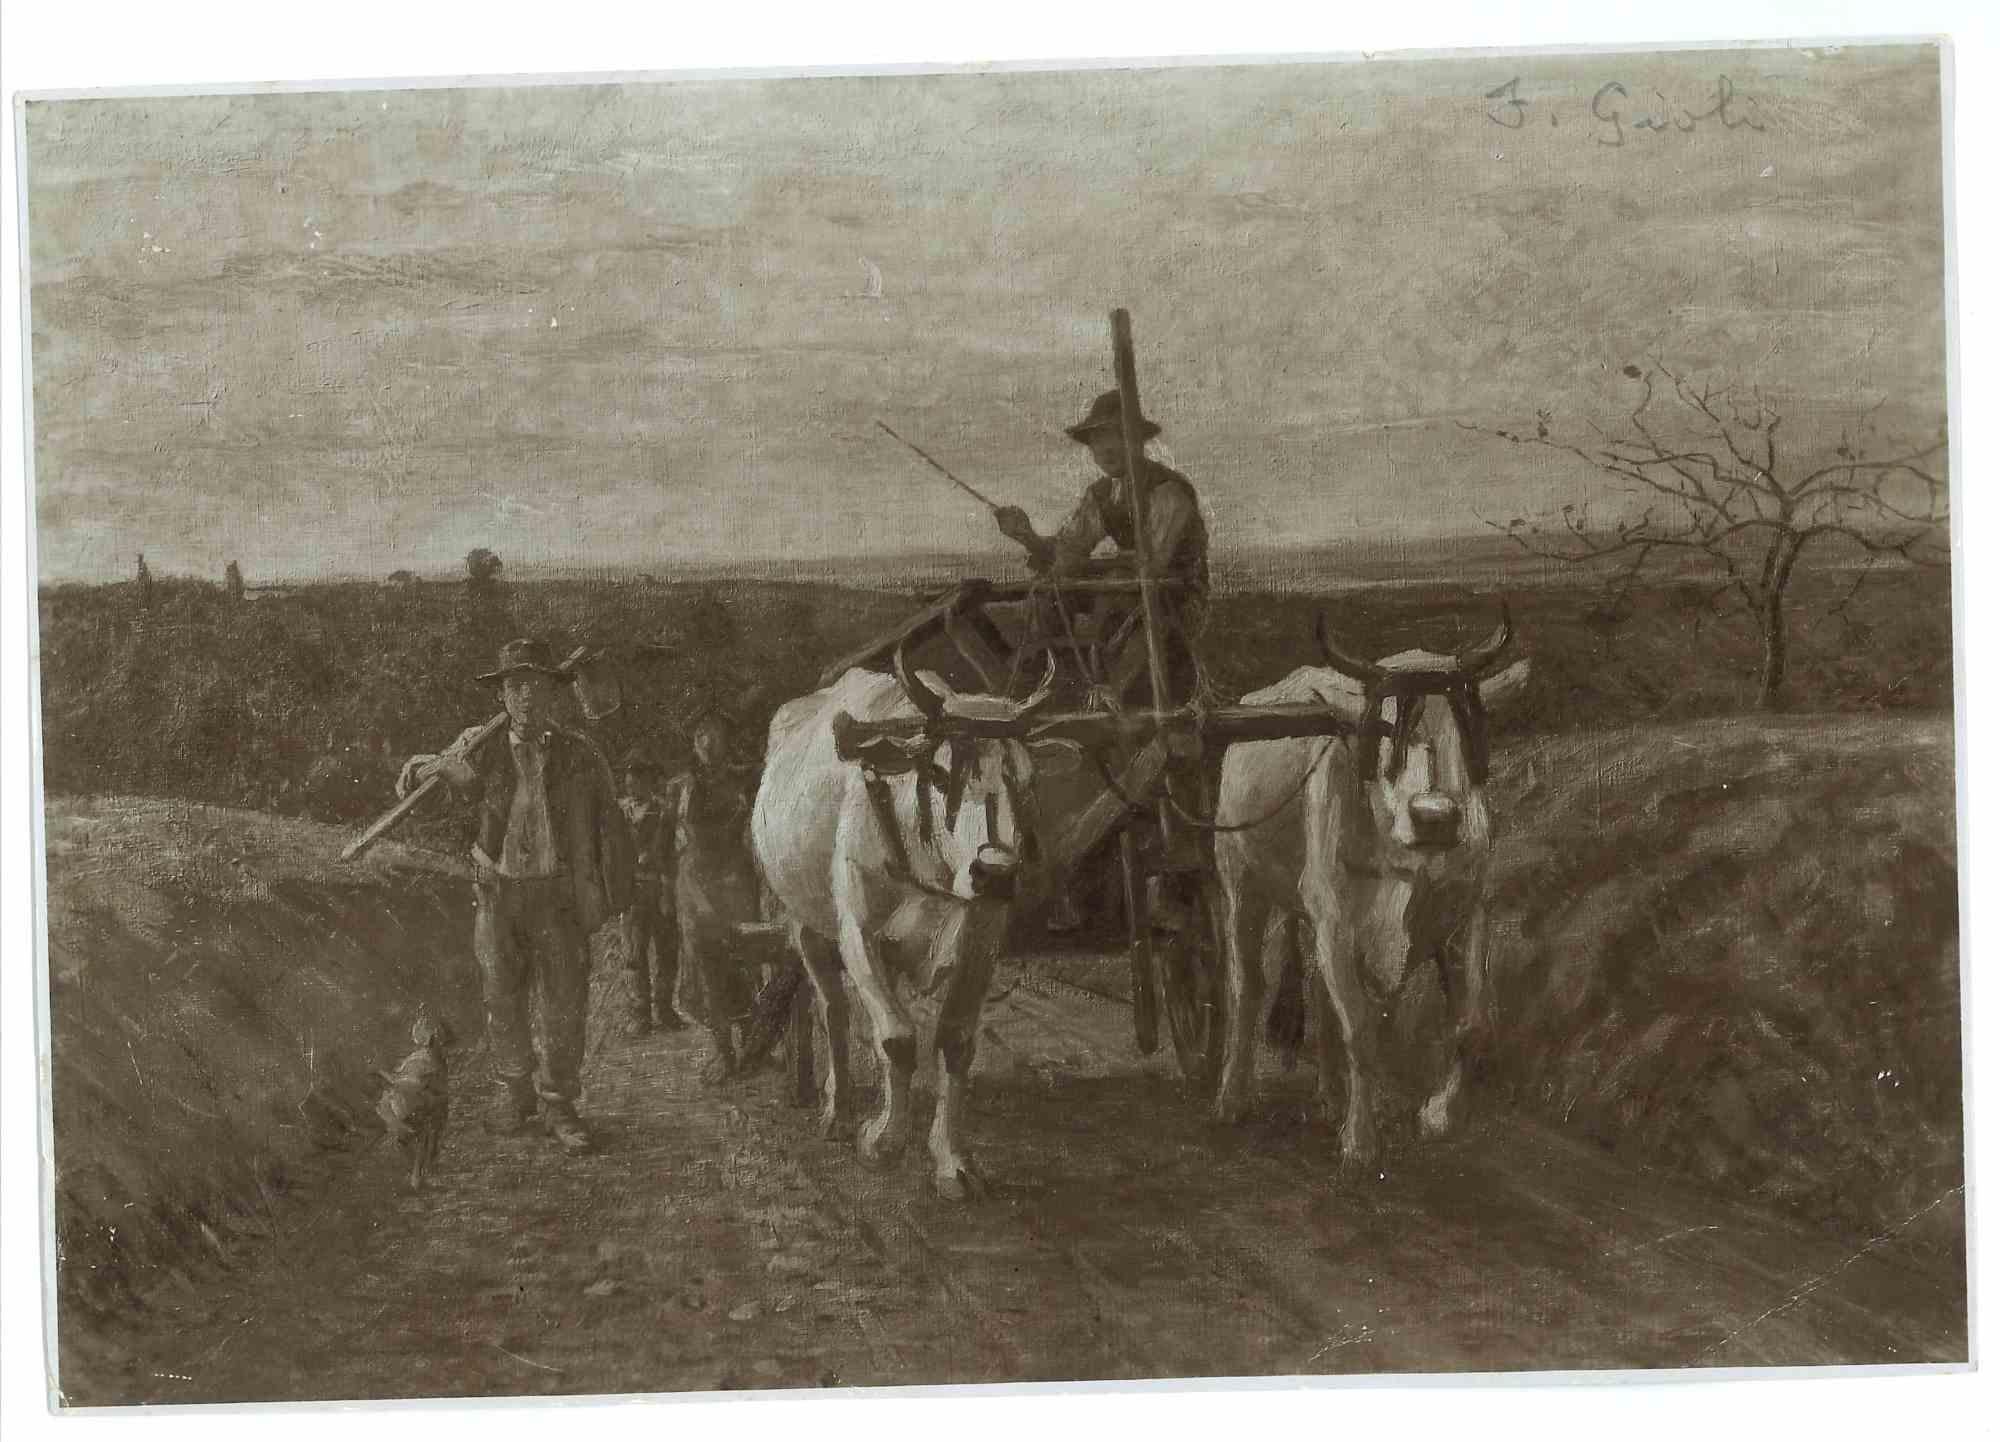 Unknown Figurative Photograph - Vintage Photo of Painting by F. Gioli - Farmer - Early 20th Century